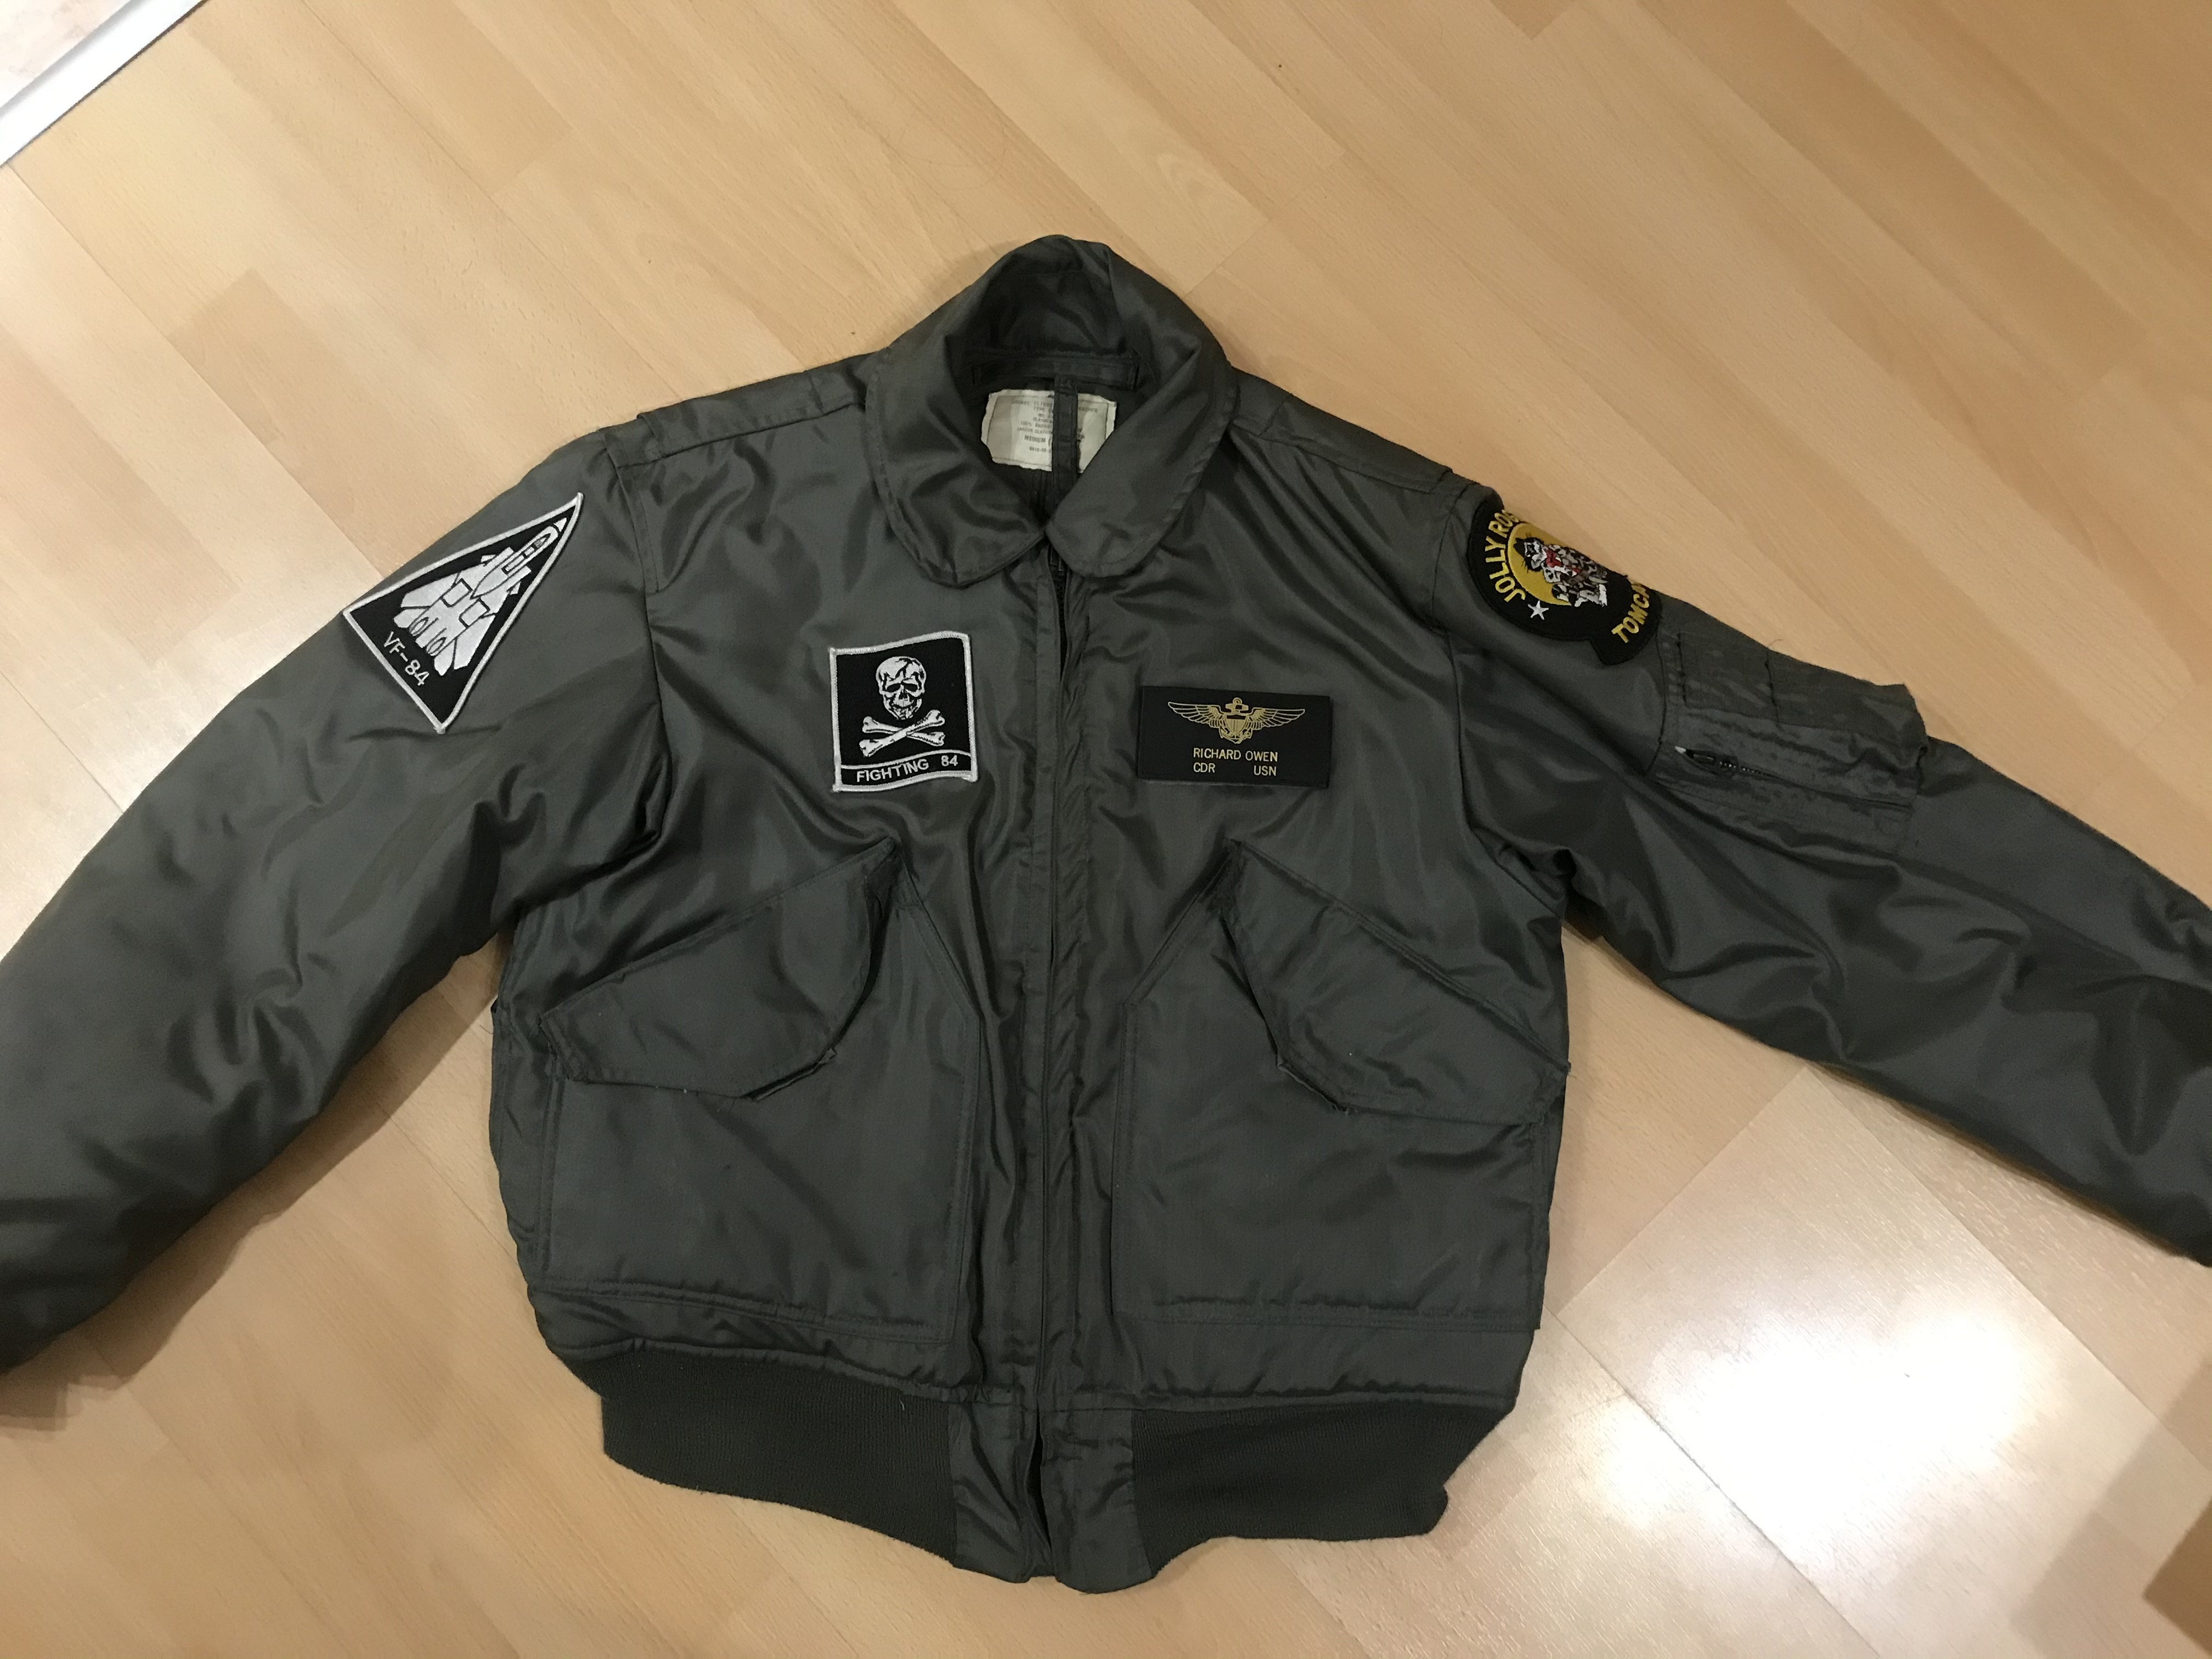 CWU-36/45 questions | Page 6 | Vintage Leather Jackets Forum